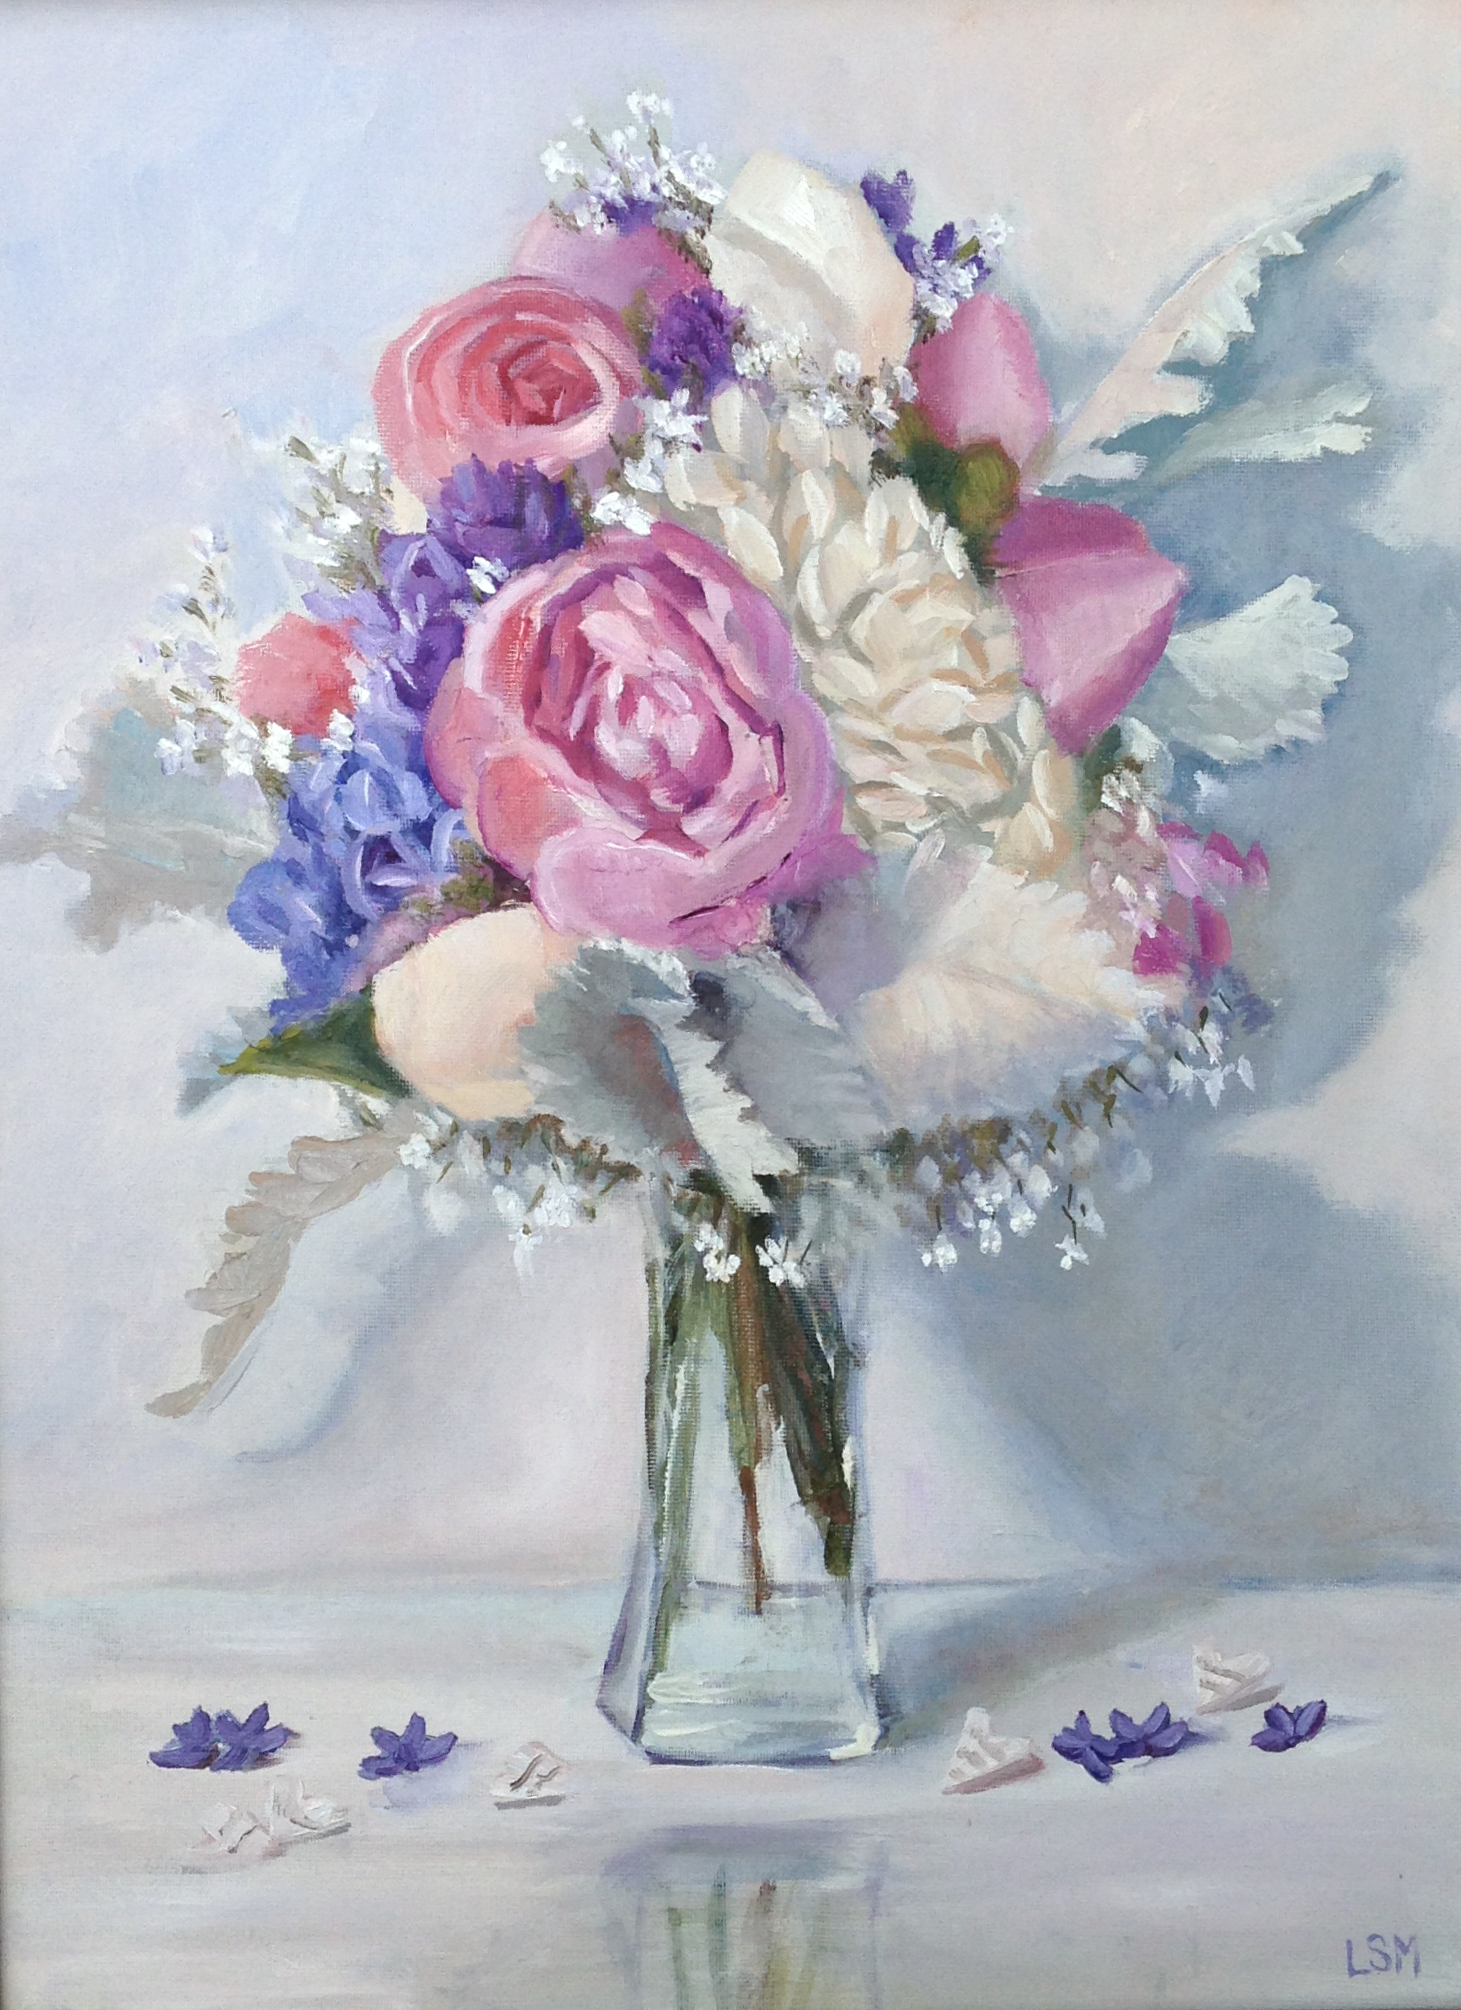 pink, purple and white wedding bouquet painting with florals in a glass vase by Linda Marino